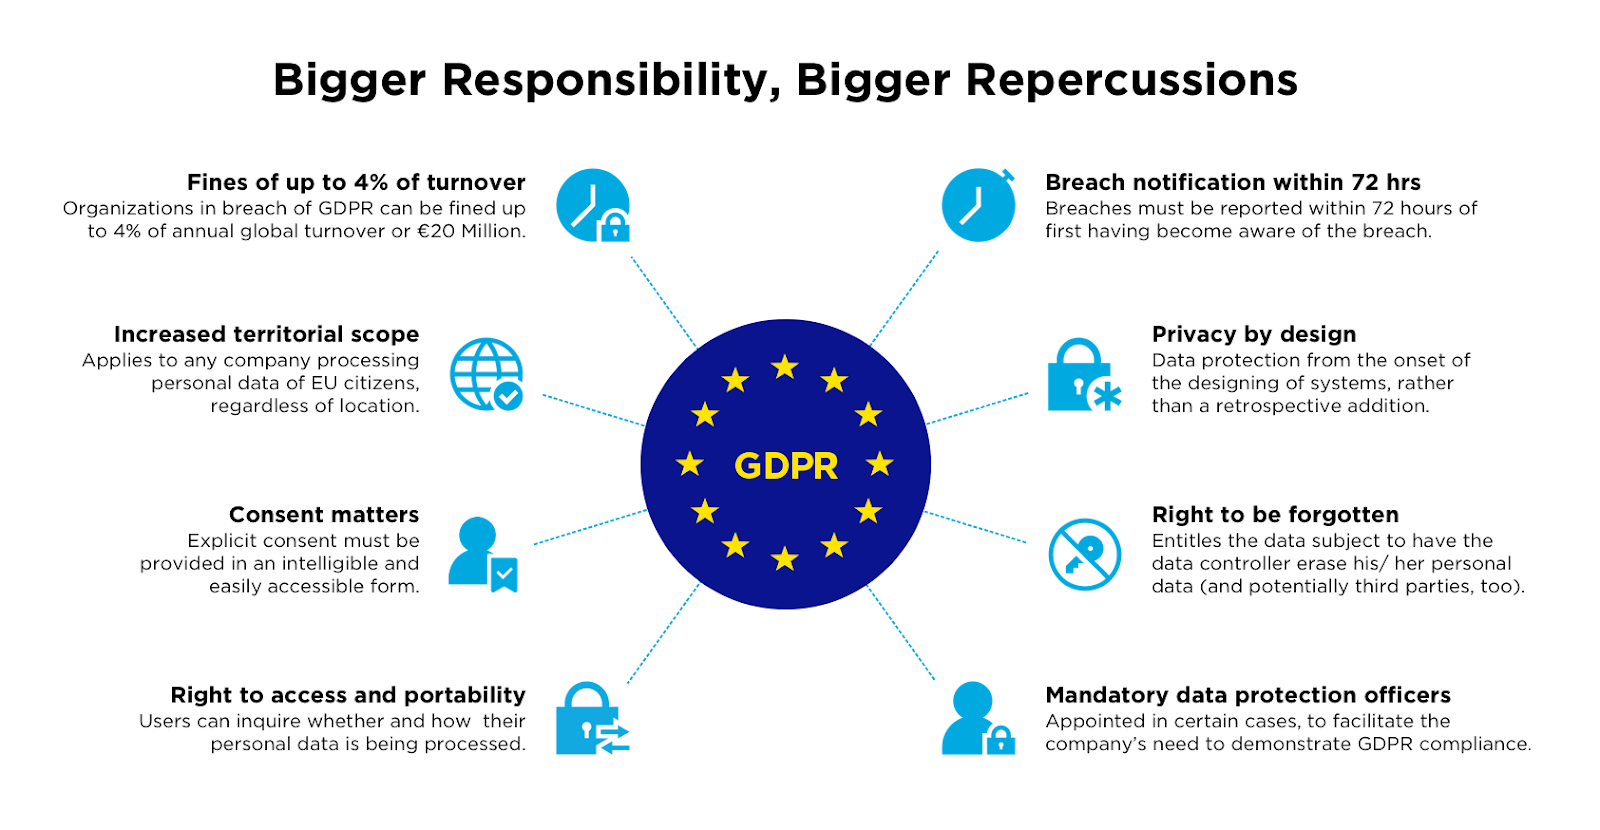 Changes with GDPR